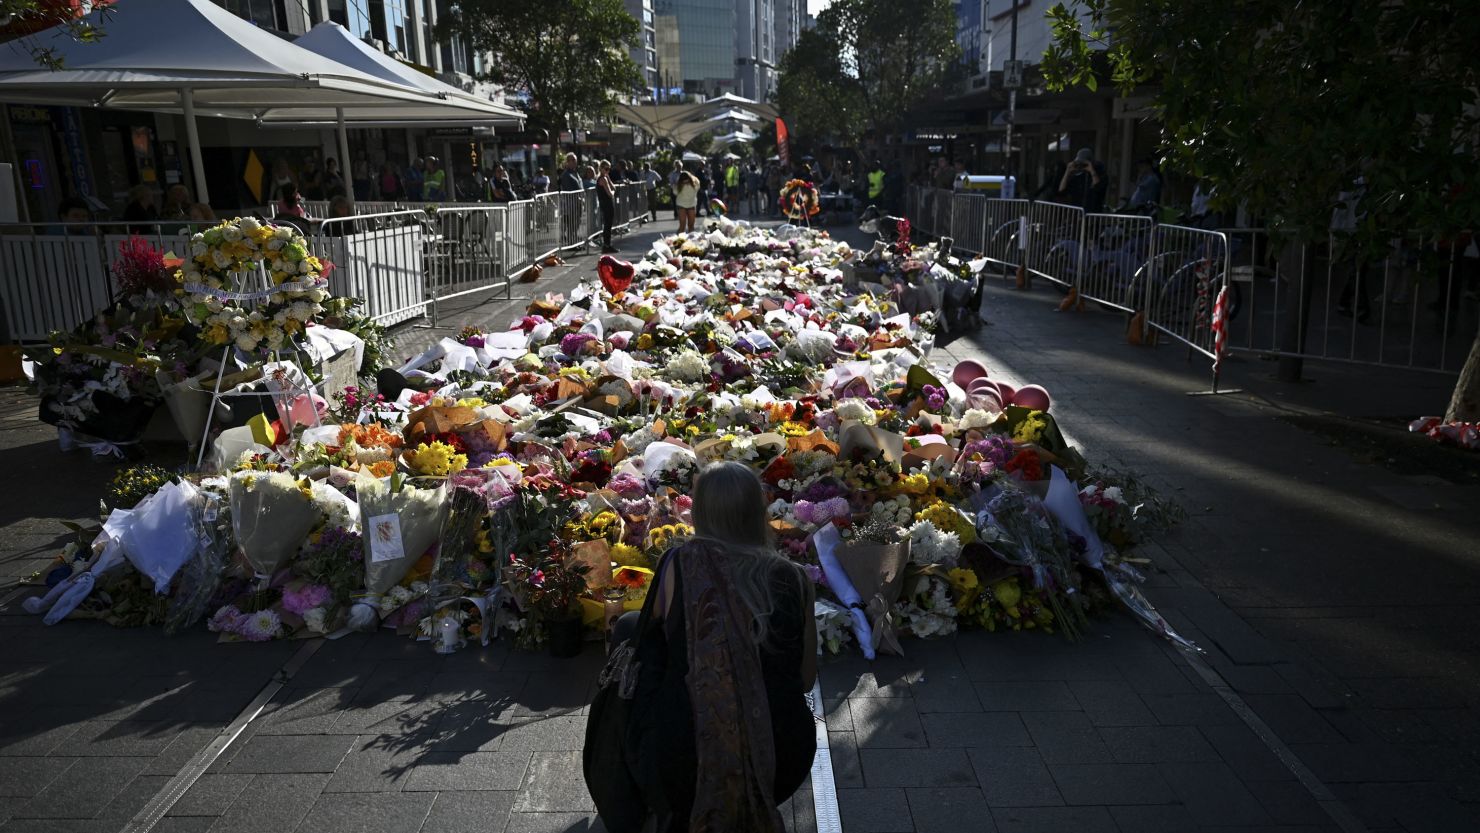 People leave floral tributes for victims of the knife attack at the Westfield shopping center in Sydney, Australia, on April 16.